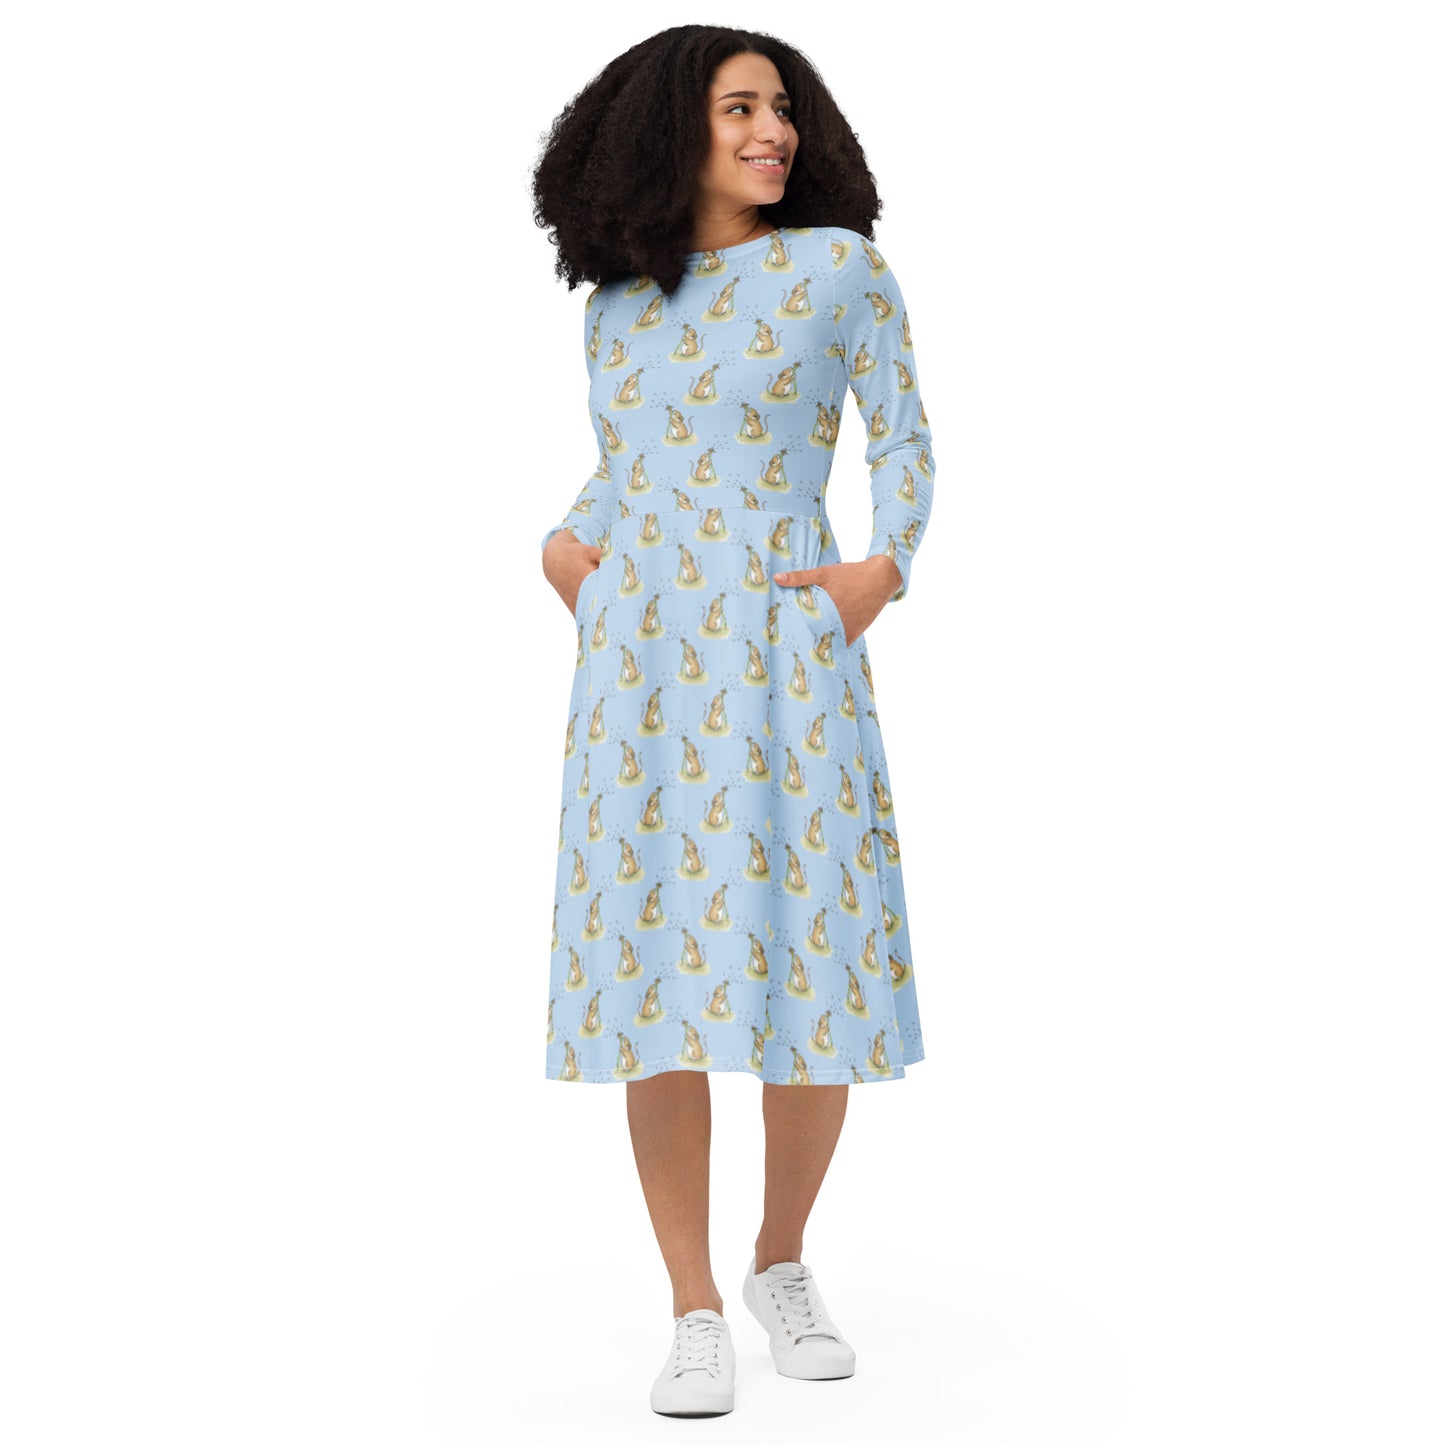 Dandelion Wish patterned long sleeve midi dress. Features patterned design of a mouse making a wish on a dandelion fluff against a light blue background. Dress has boat neckline, fitted waist, flared bottom, and side pockets. Front view of female model with hands in her pockets.